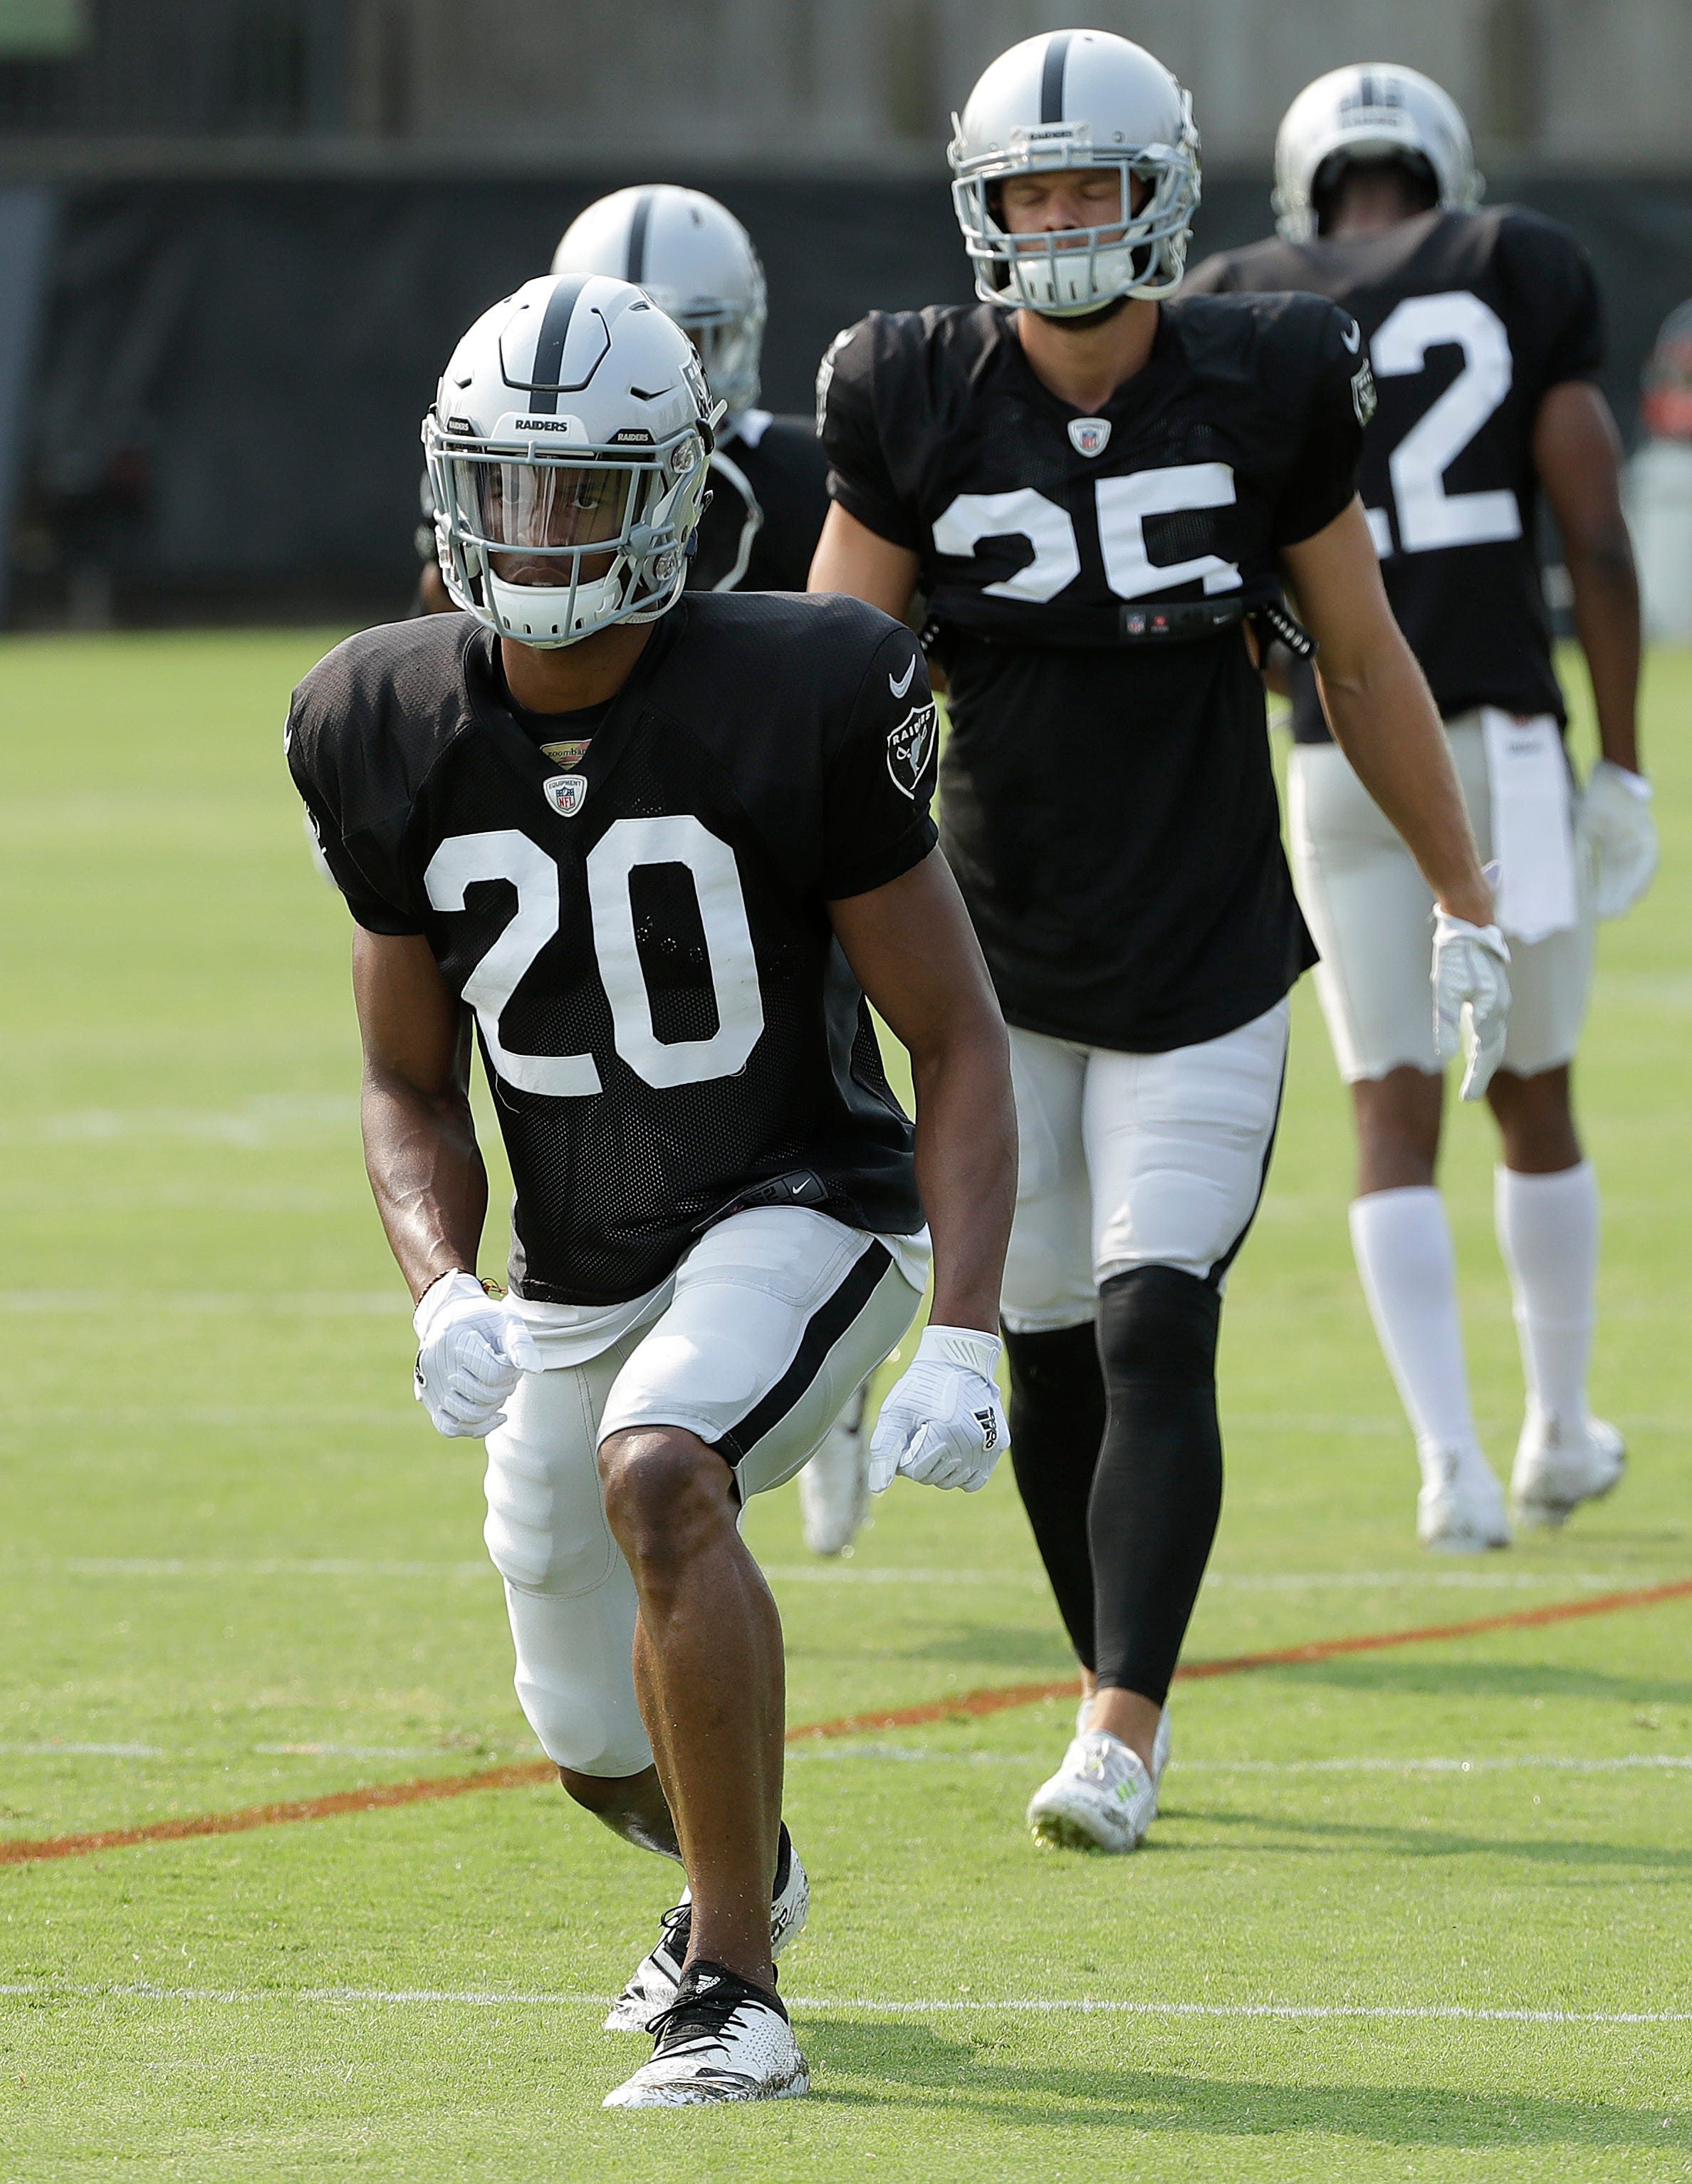 Raiders waive 2017 second-round draft pick Obi Melifonwu, sign Dominique Rodgers-Cromartie